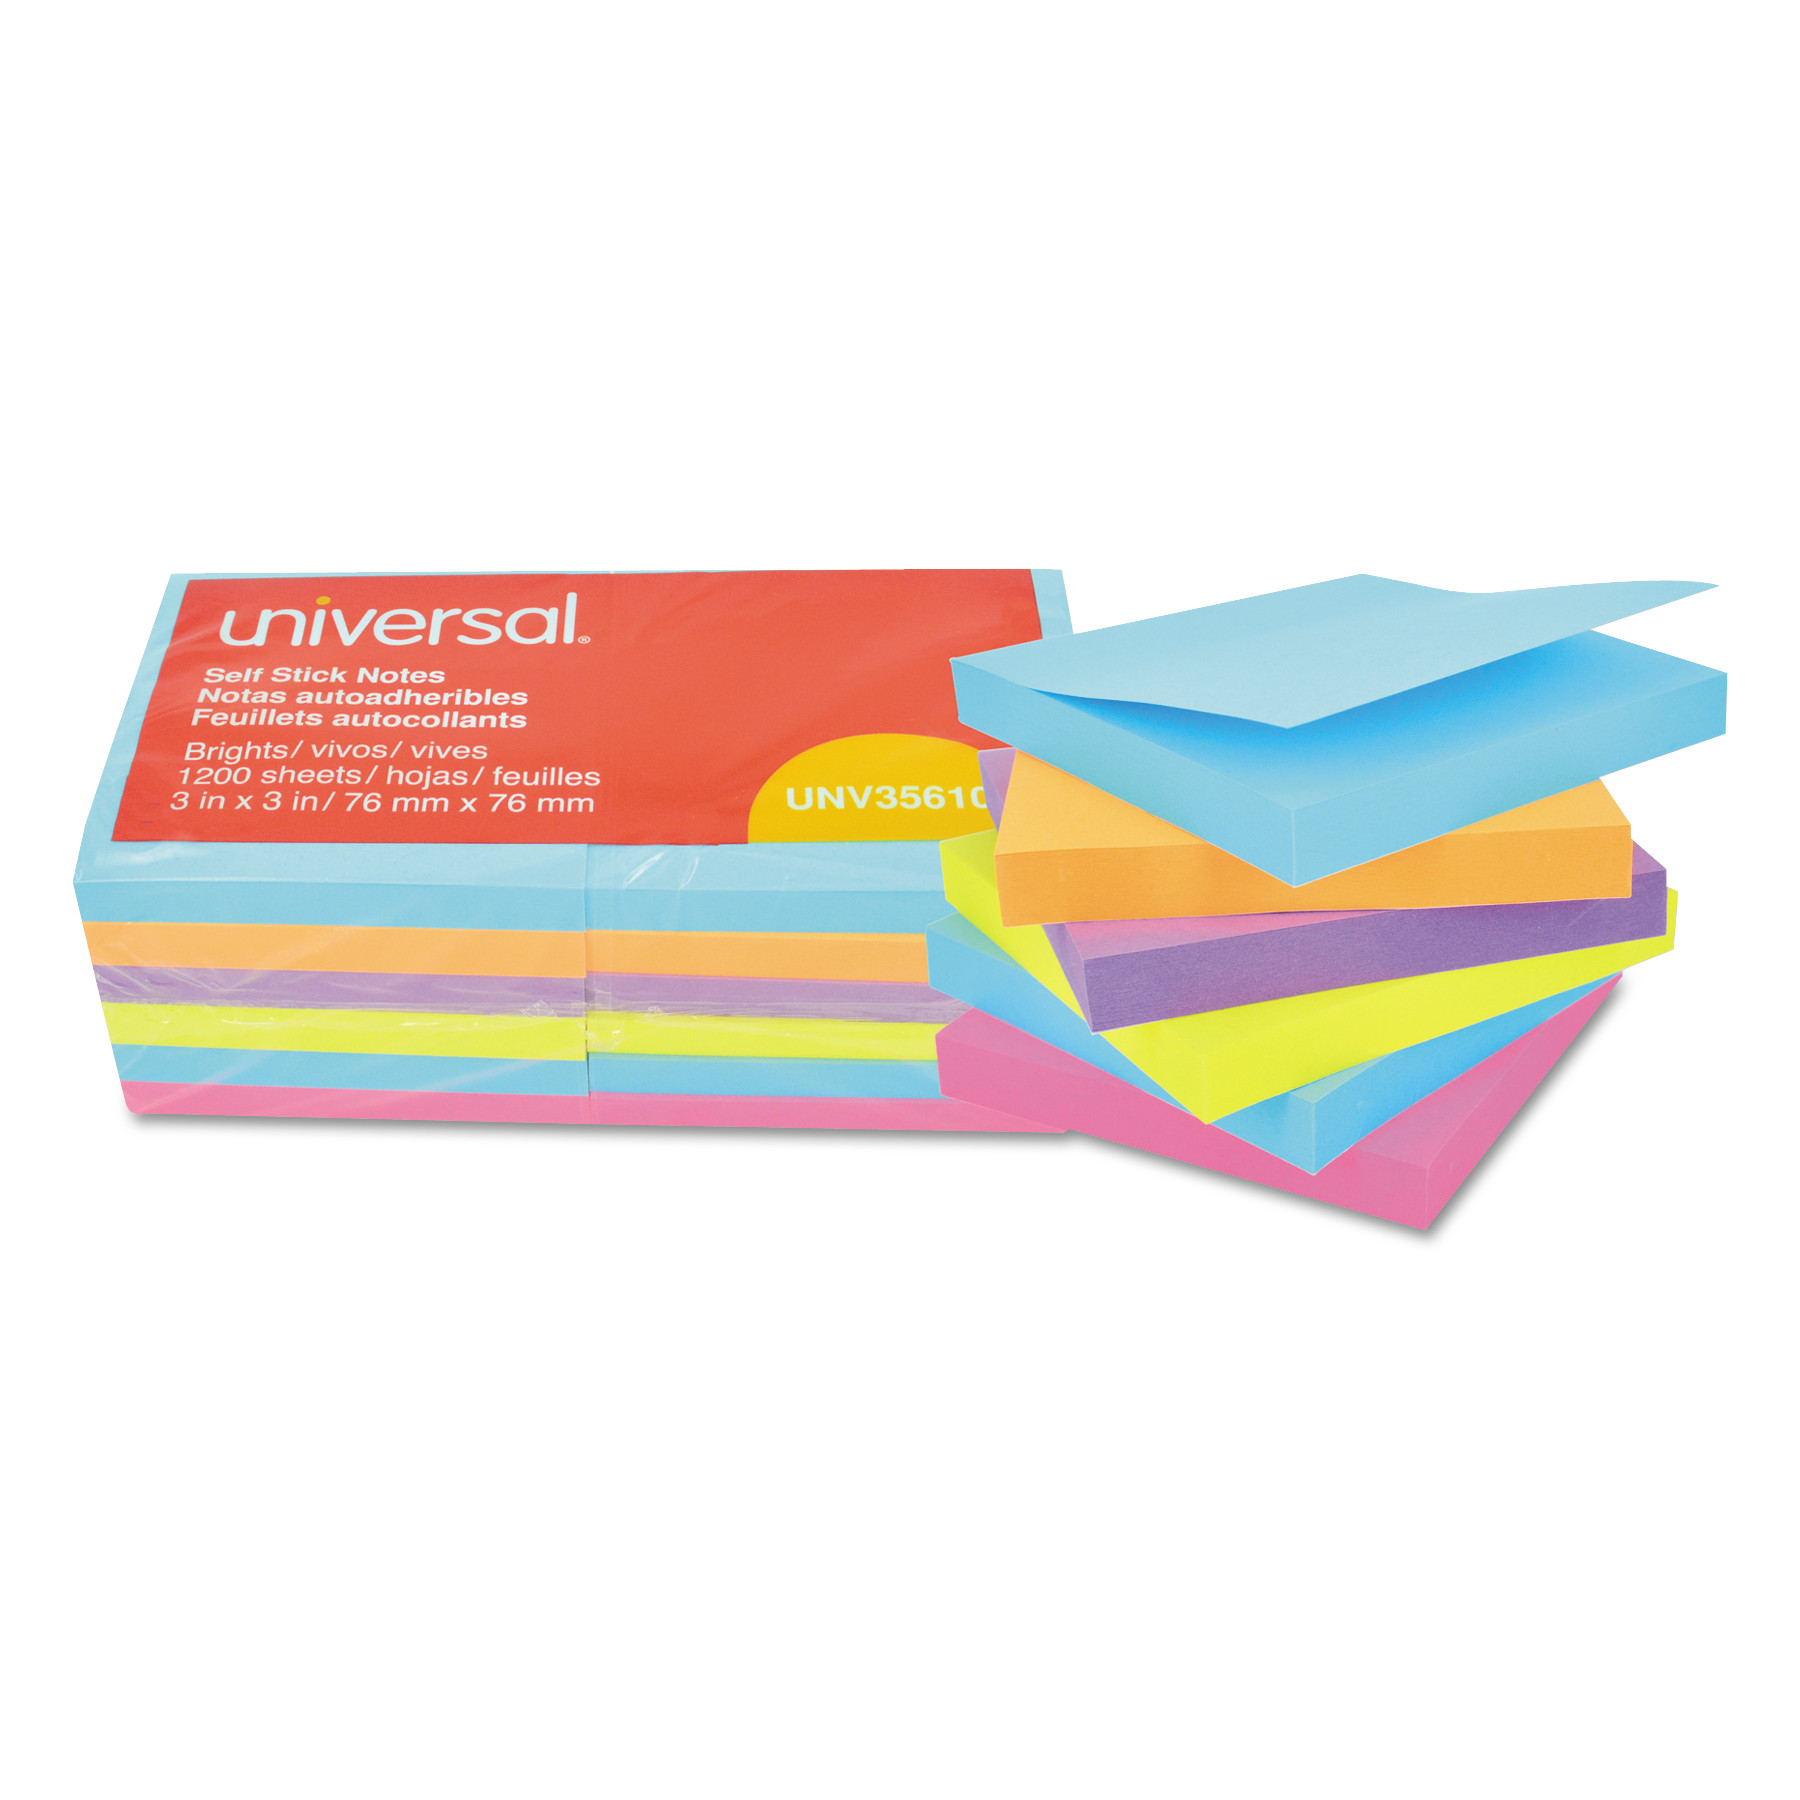 100 Sheets/Pad Early Buy Sticky Notes 10 Bright Color 12 Pads Self-Stick Notes 3 in x 3 in 